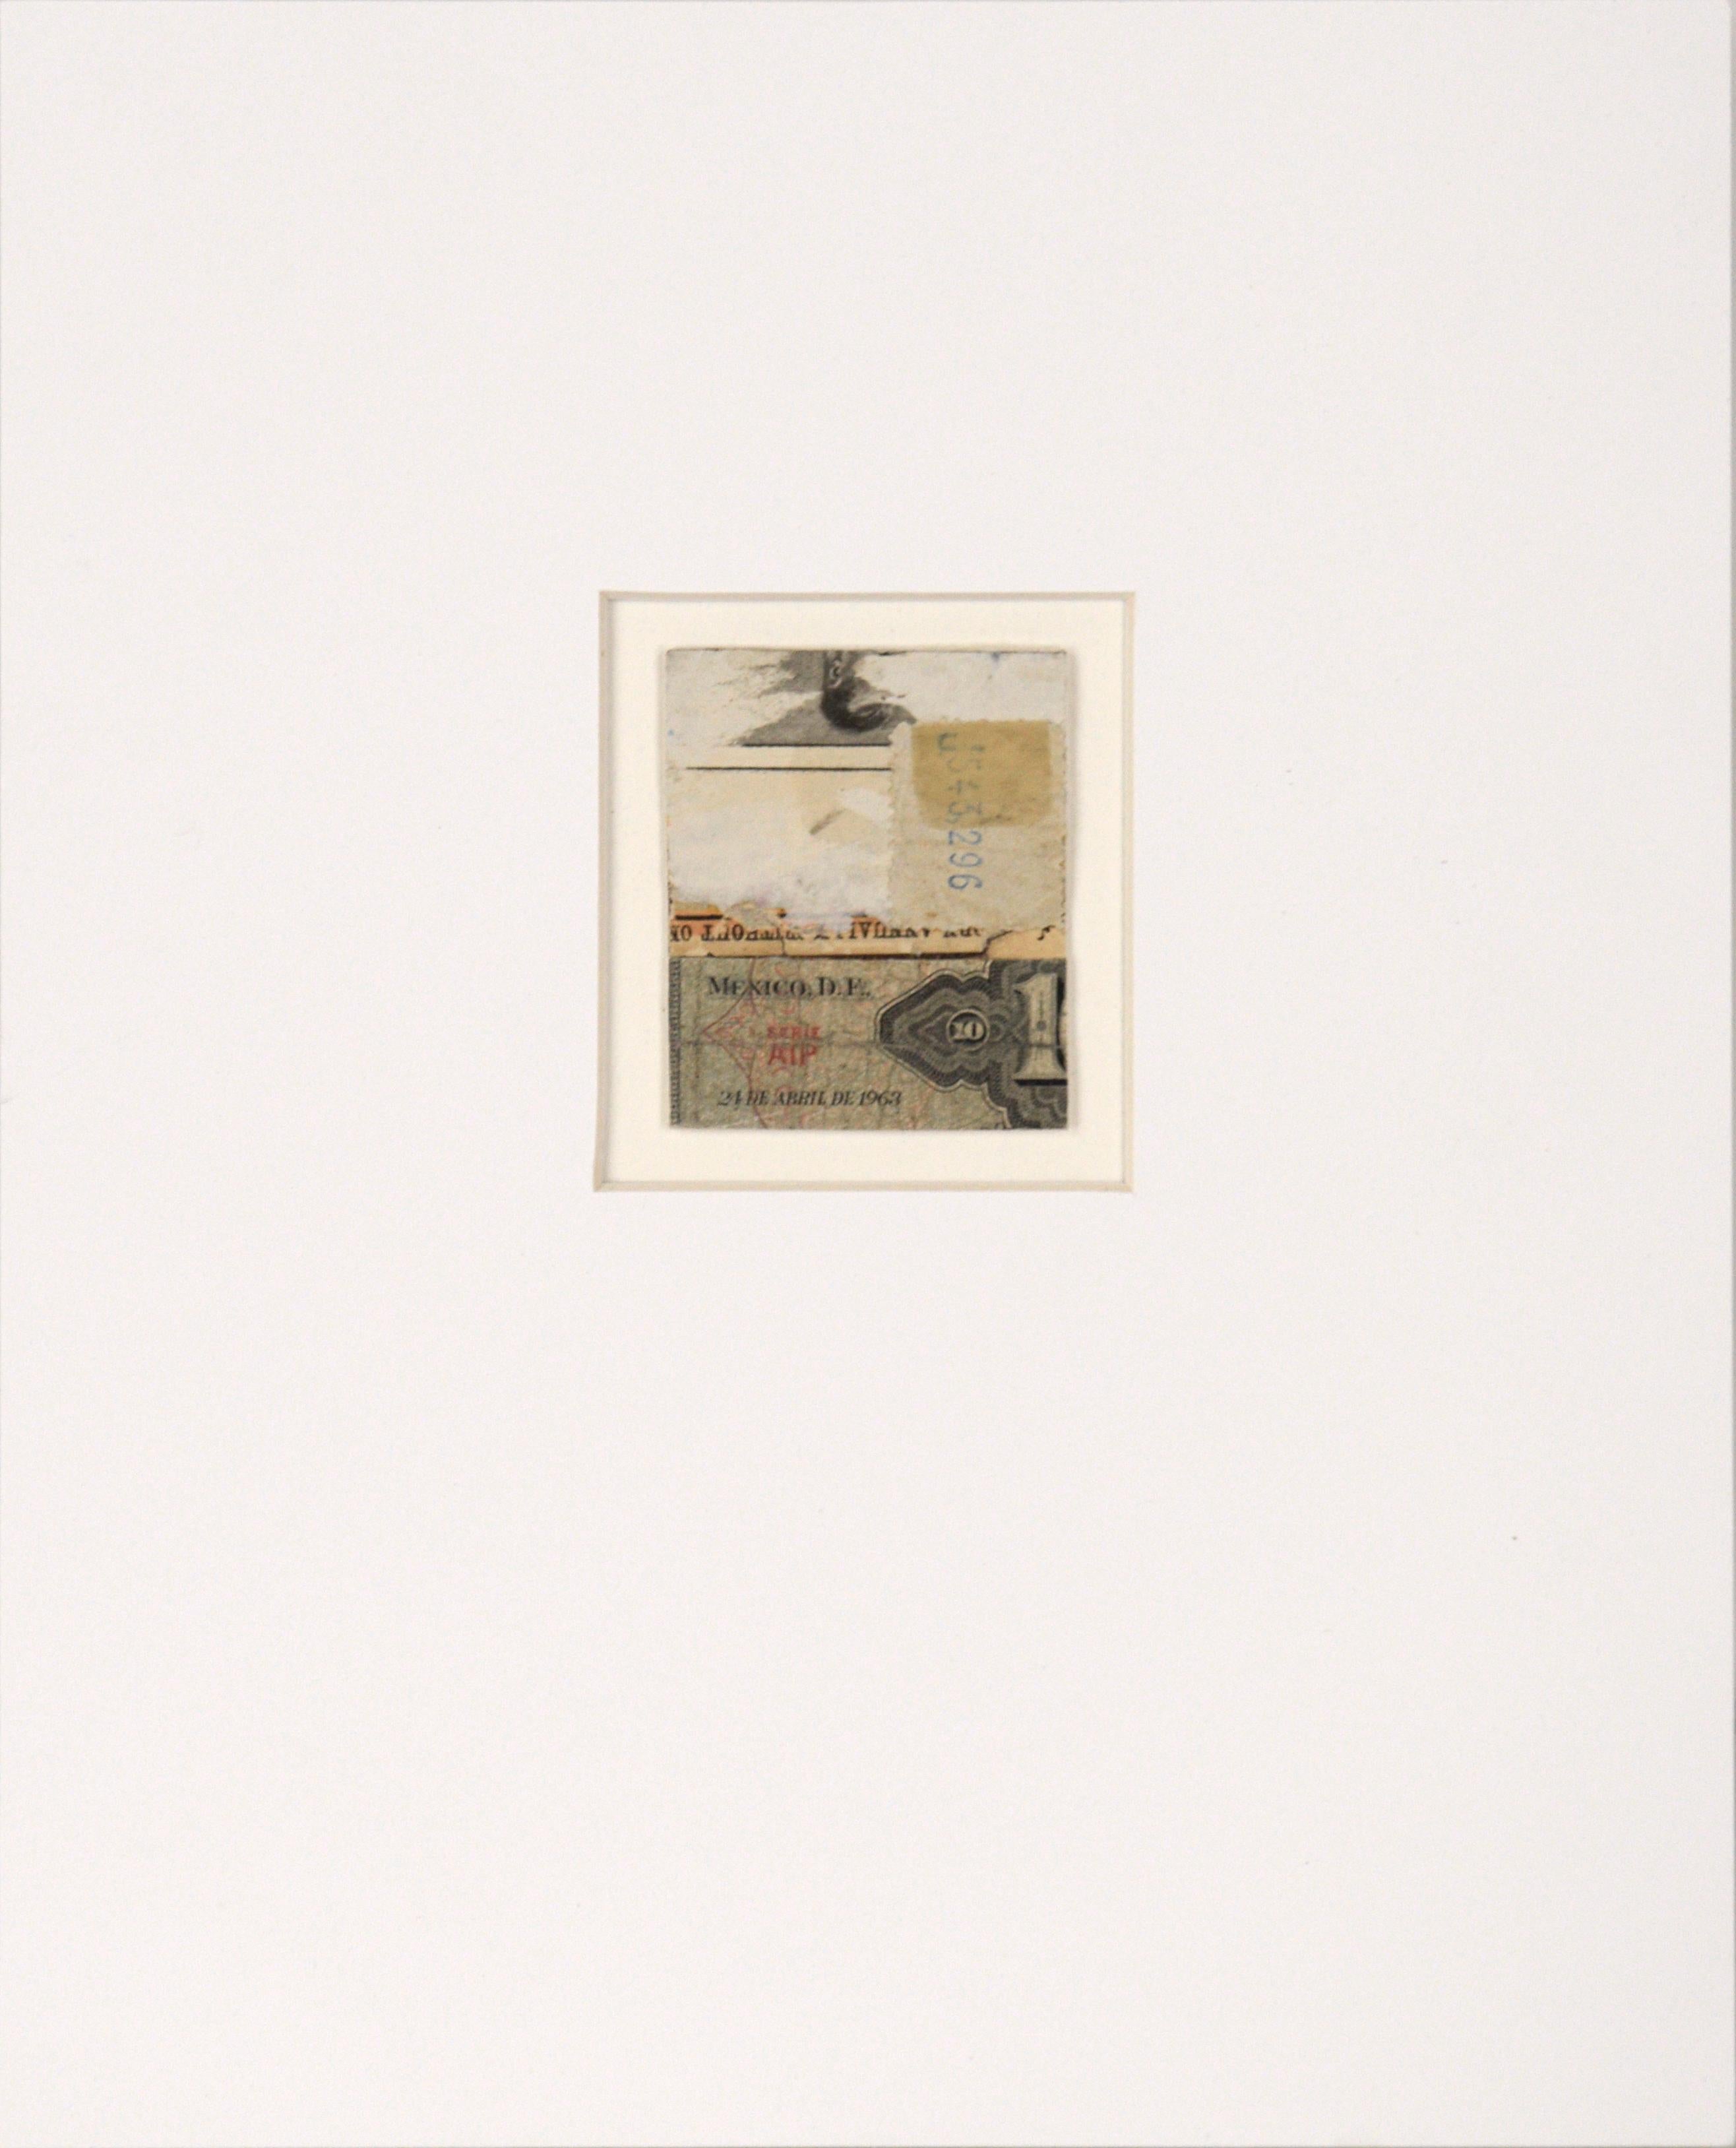 "No. 3080" Miniature Collage Currency by Michael Pauker - Art by Michael Pauker 